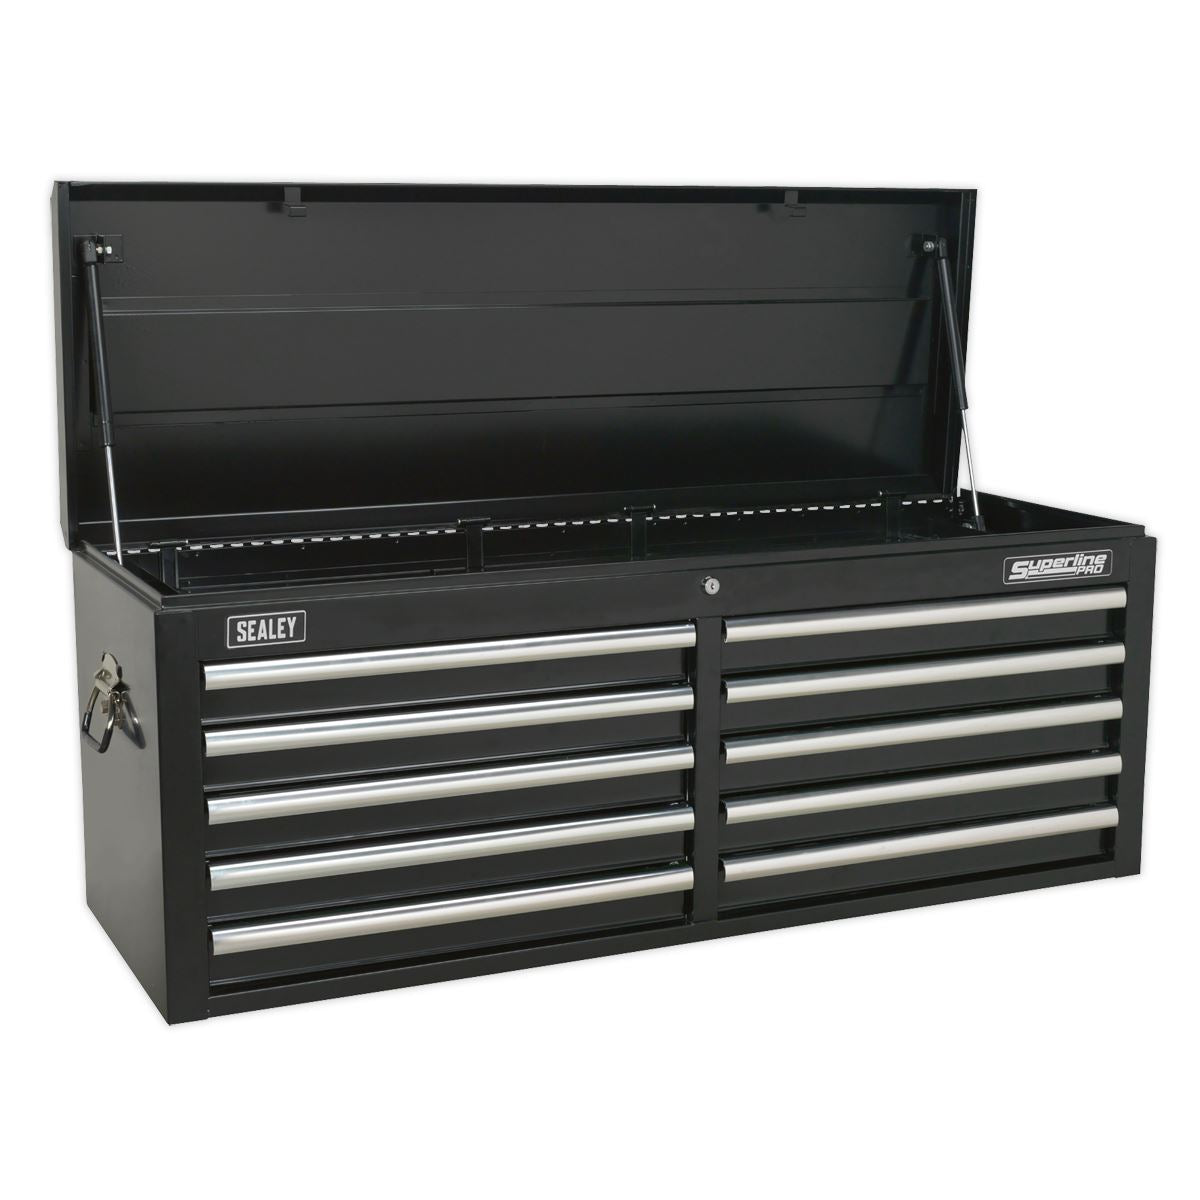 Sealey Topchest 10 Drawer with Ball Bearing Slides - Black AP5210TB